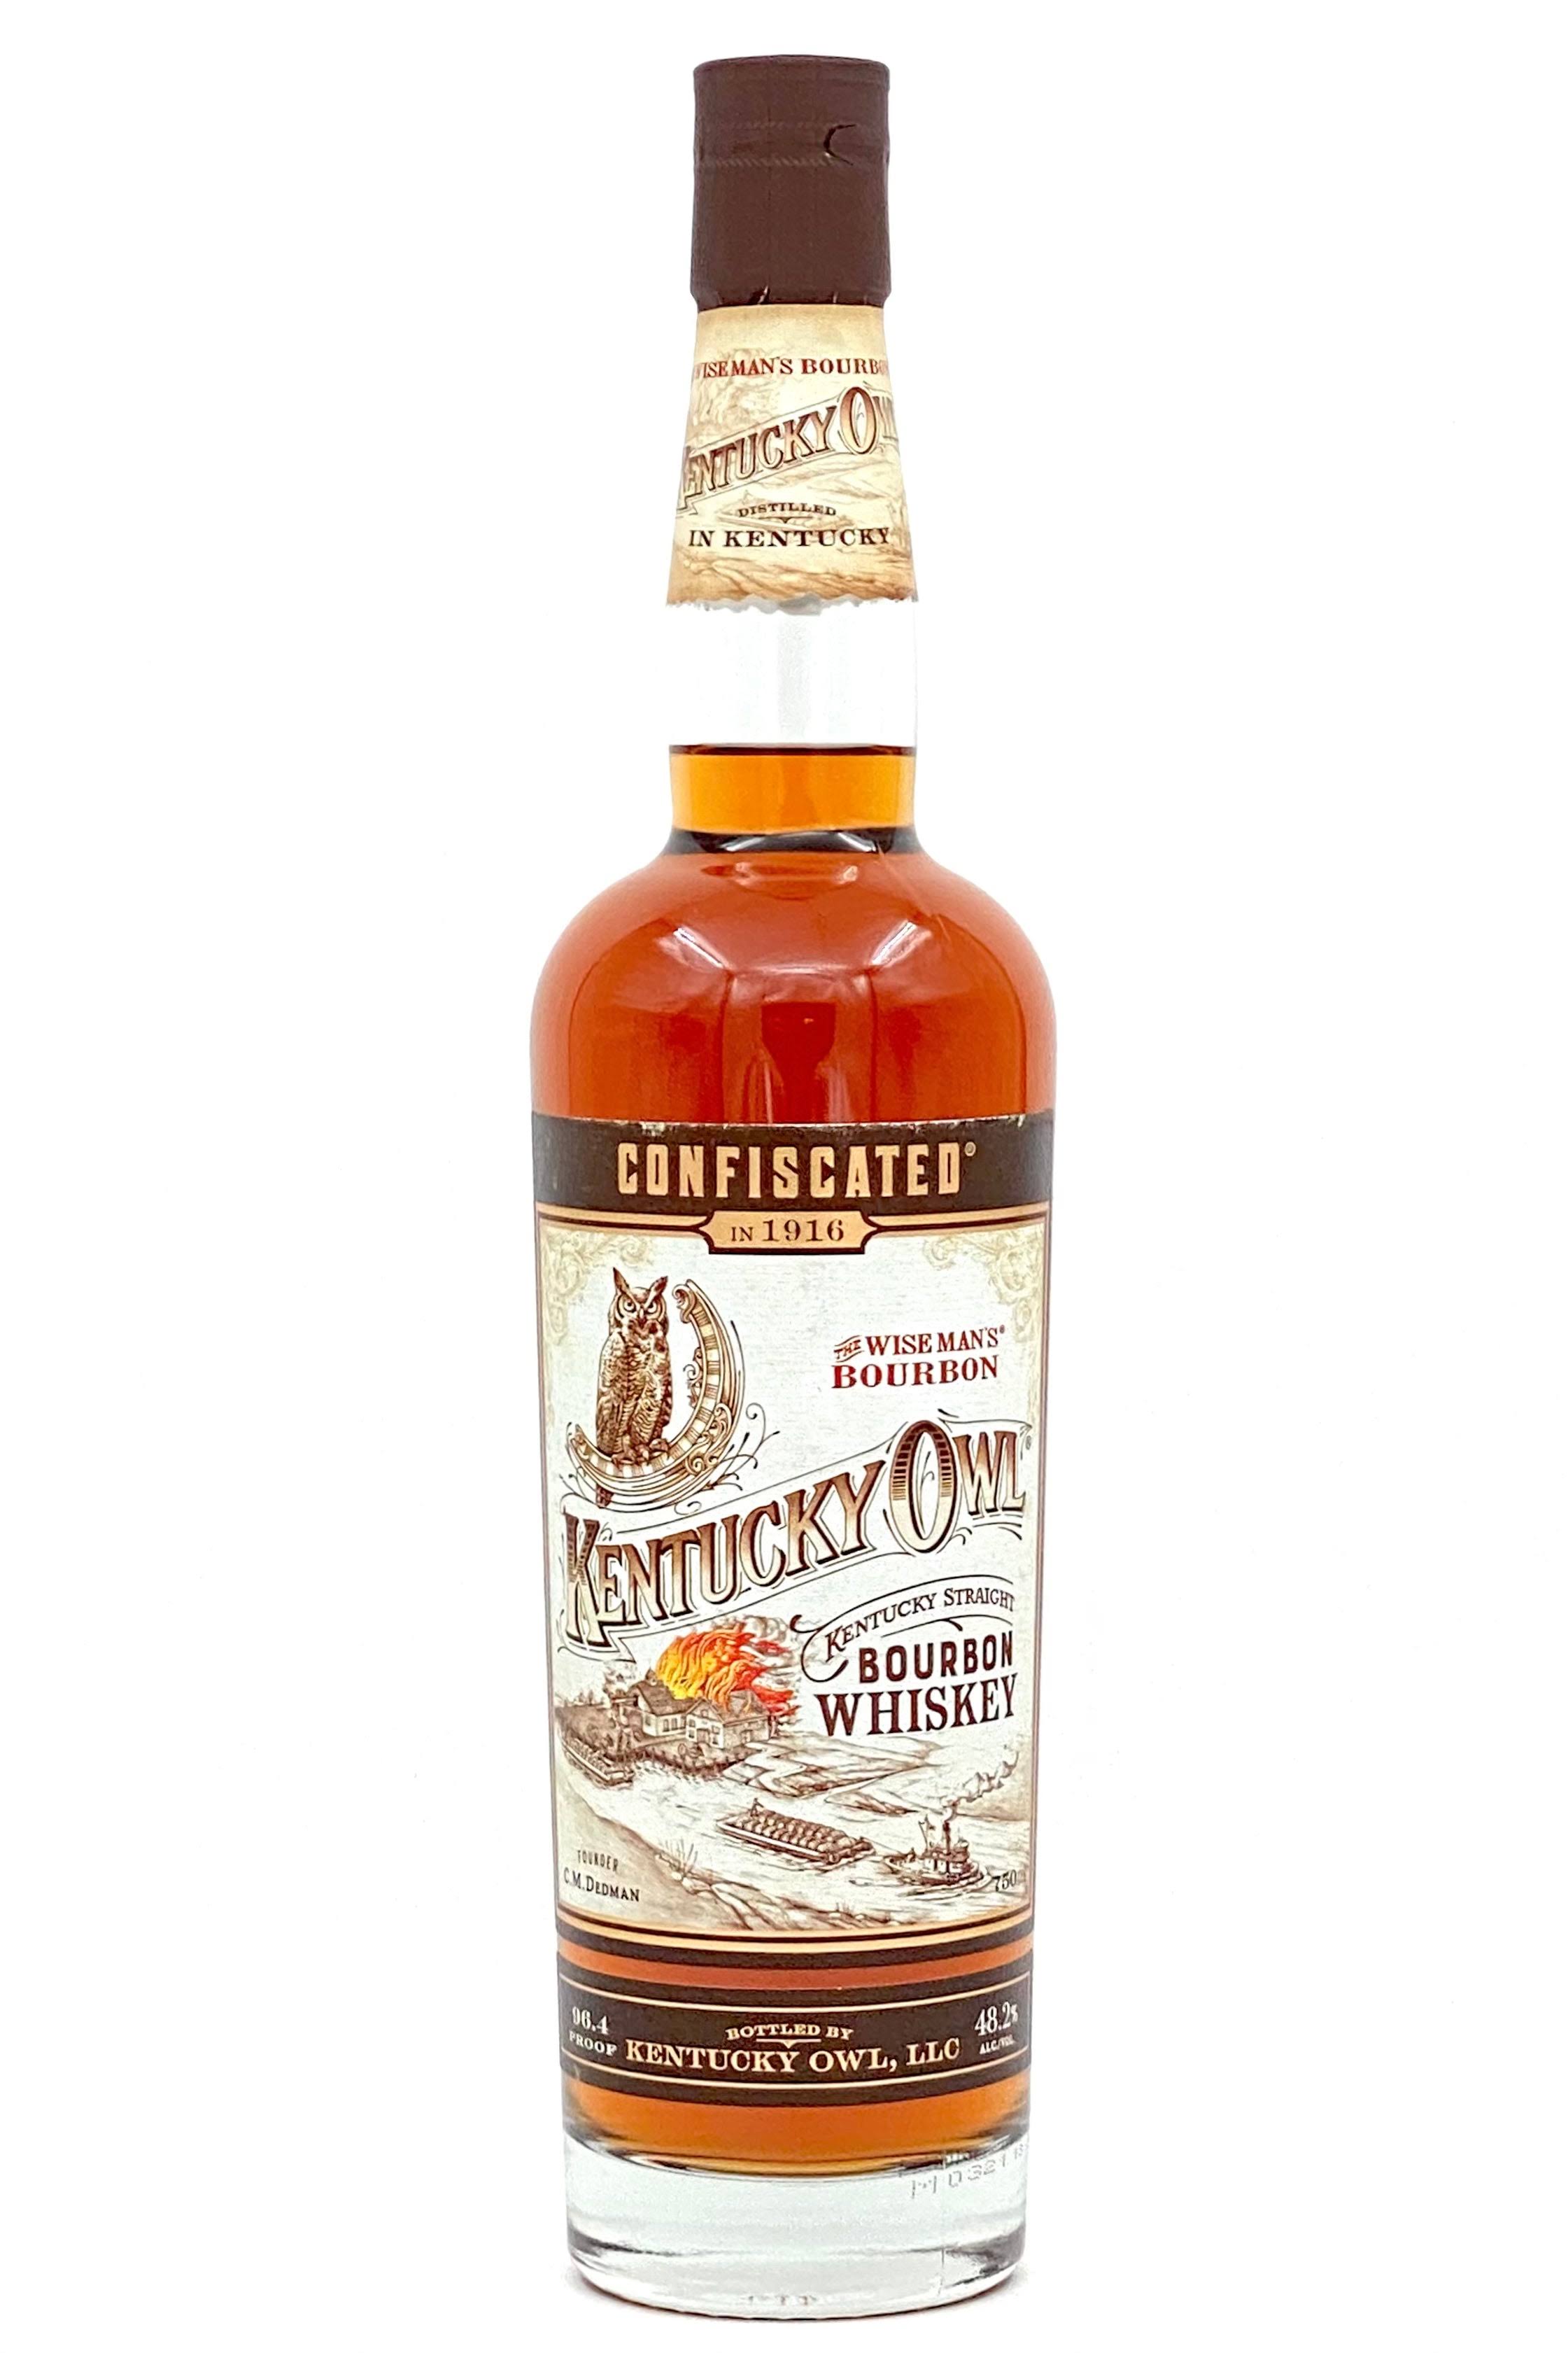 Kentucky Owl “Confiscated” Straight Bourbon Whiskey 75cl